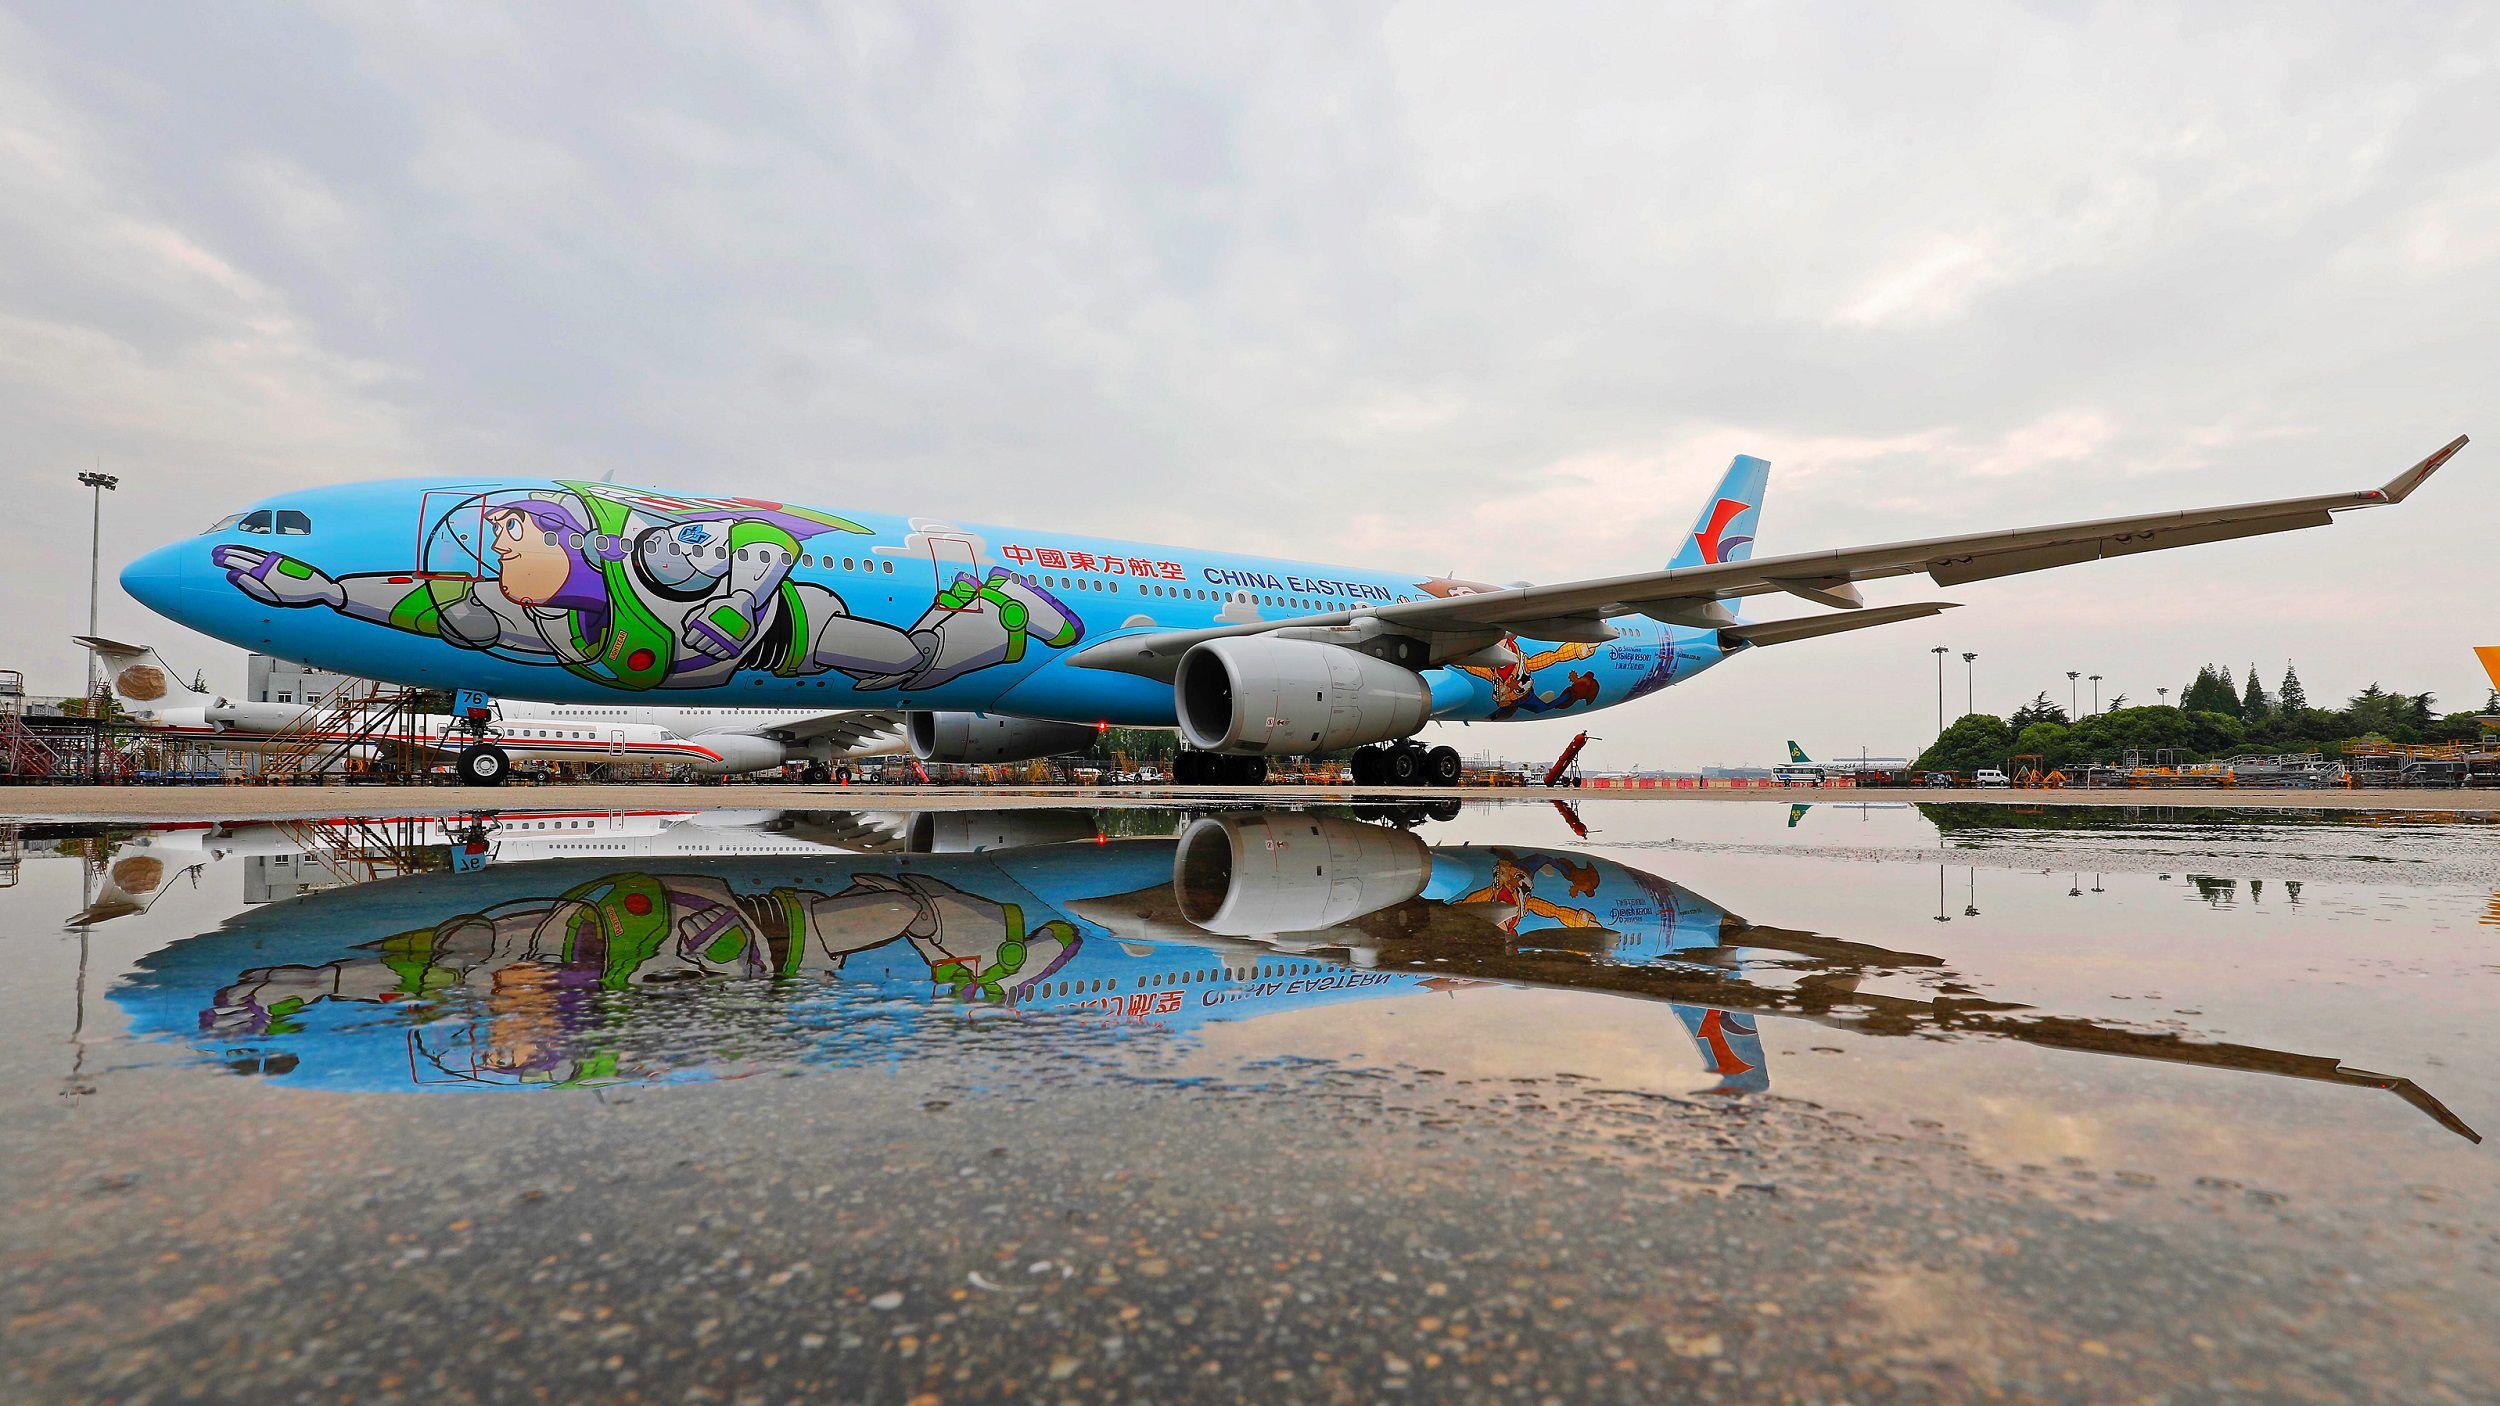 Yellow Bird Airline Logo - 12 of the coolest aircraft paint schemes you'll ever see | CNN Travel